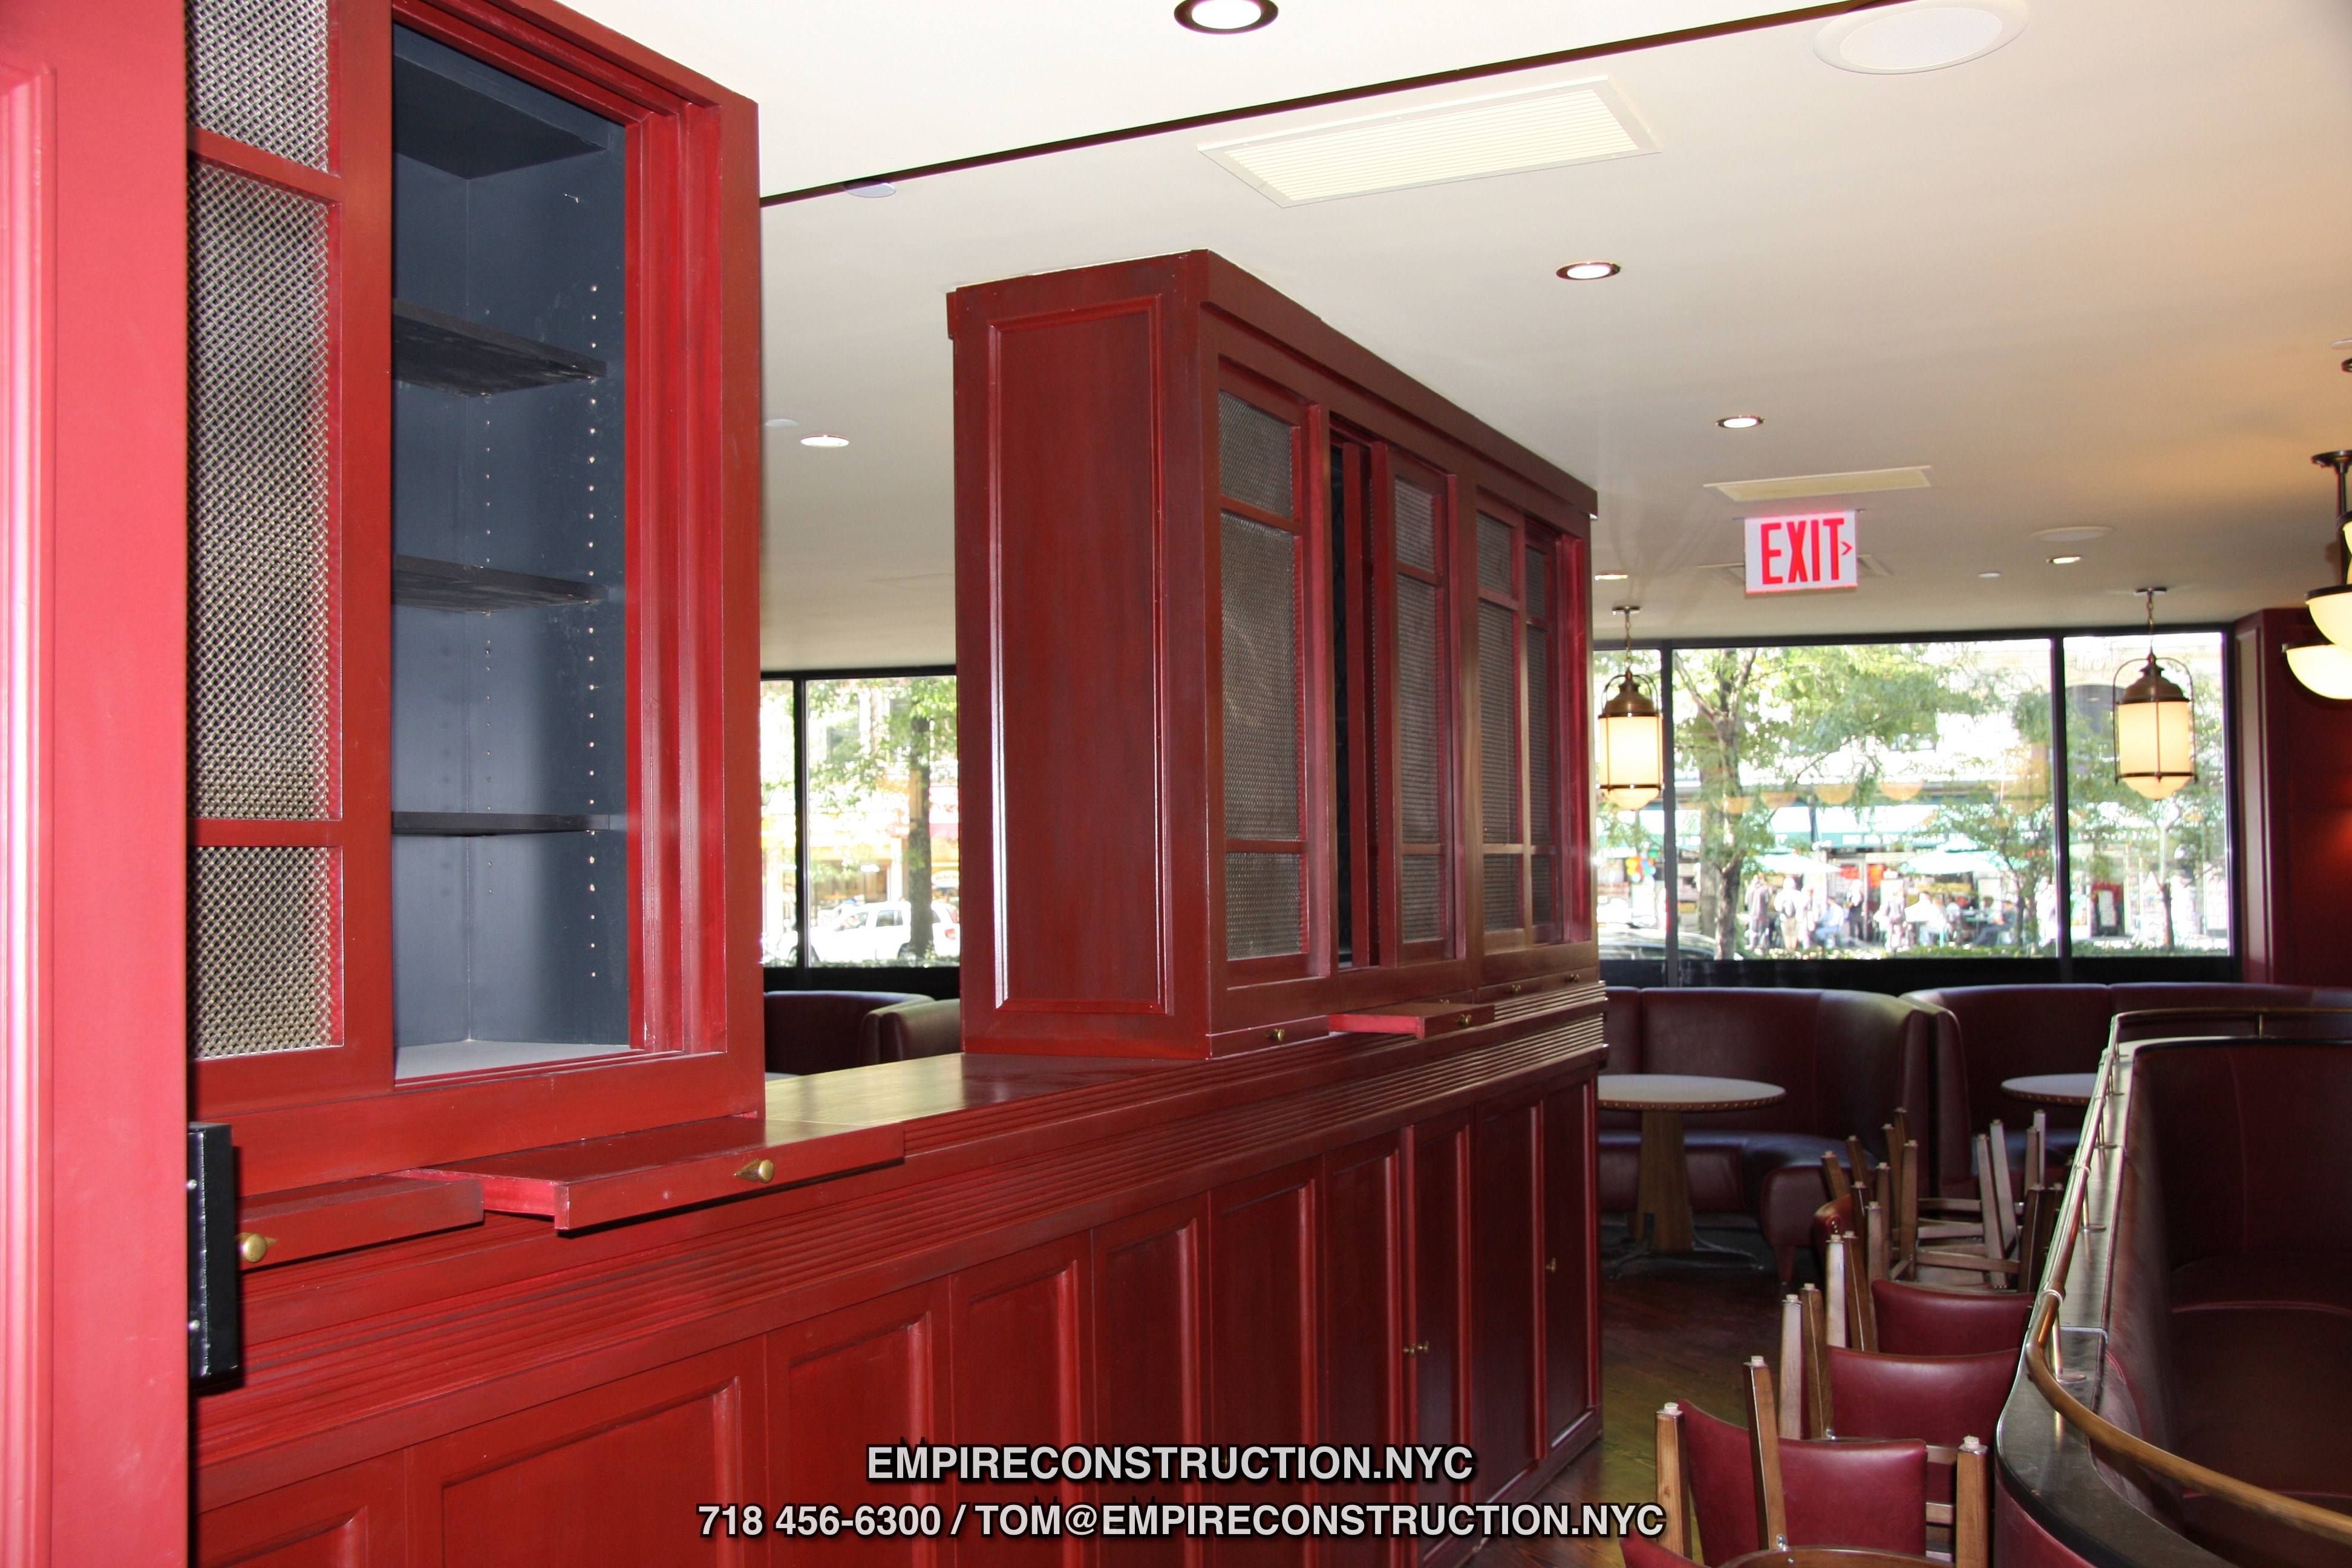 We do custom bars,  furniture and cabinets, maitre D stands, waiter stations, wine storages, custom commercial kitchens, decorative columns, vestiubles, shelves, racks, tables, chairs, storage closets, build ins, paneling, countertops, lighting design, low voltage wirening,  register and computer station set up, video security and fire alarms, wall and floor structures and any other elements that go into bar and restaurant building. 